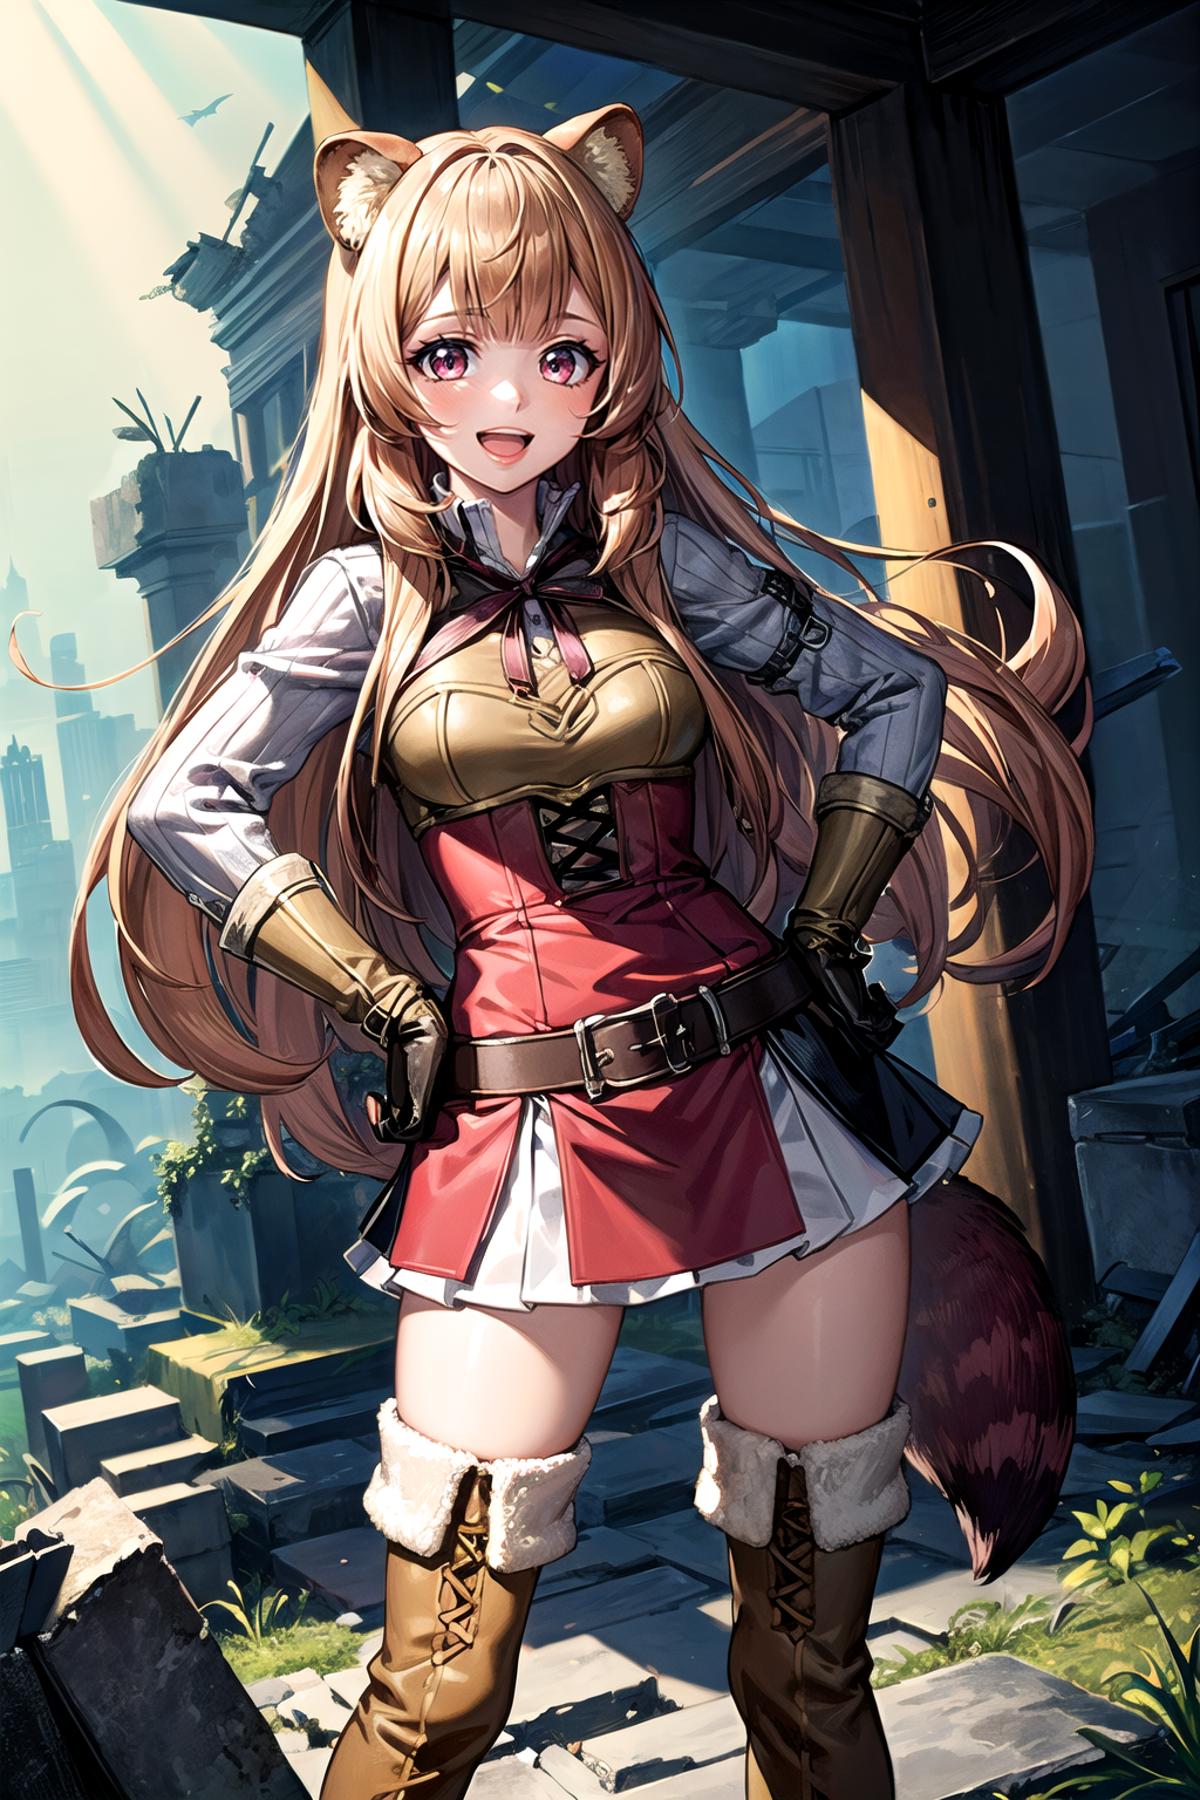 Raphtalia | The Rising of the Shield Hero image by Deto15